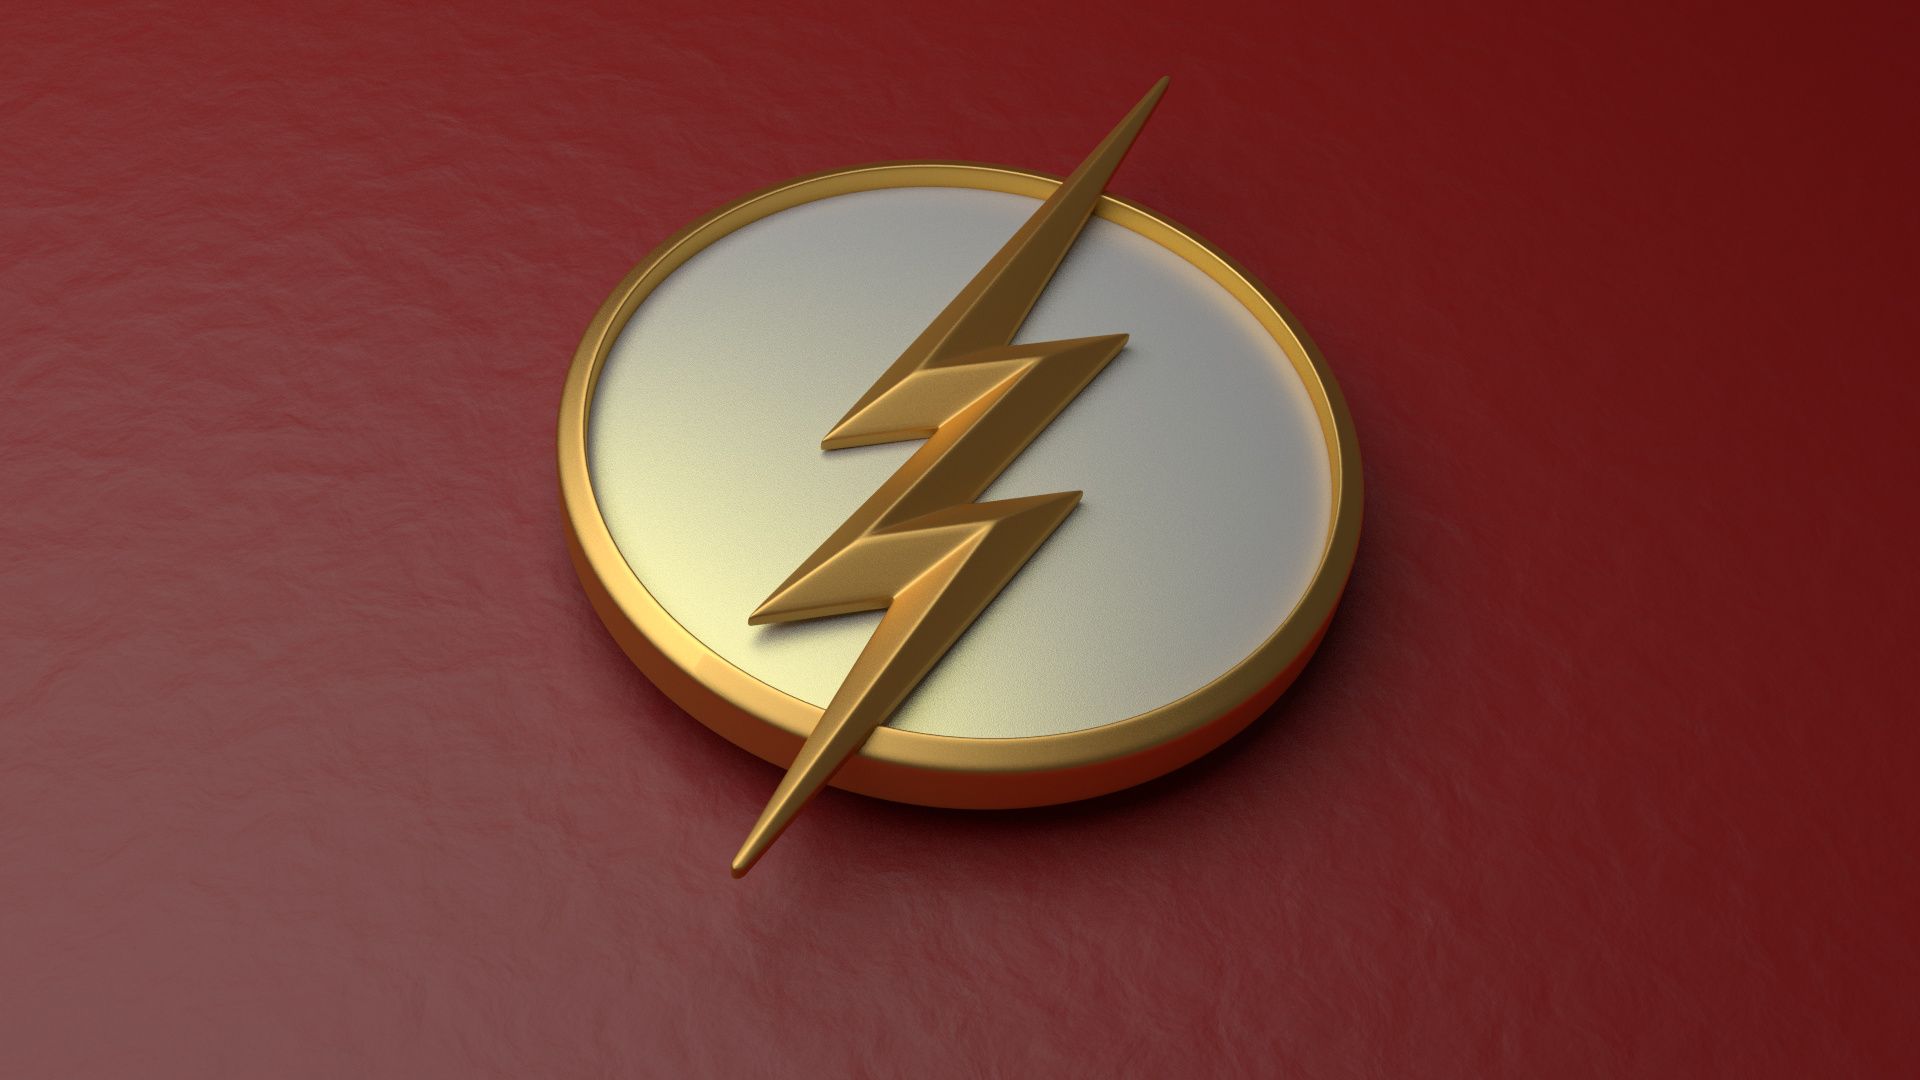 The Flash Wallpapers 1920x1080 - Album on Imgur